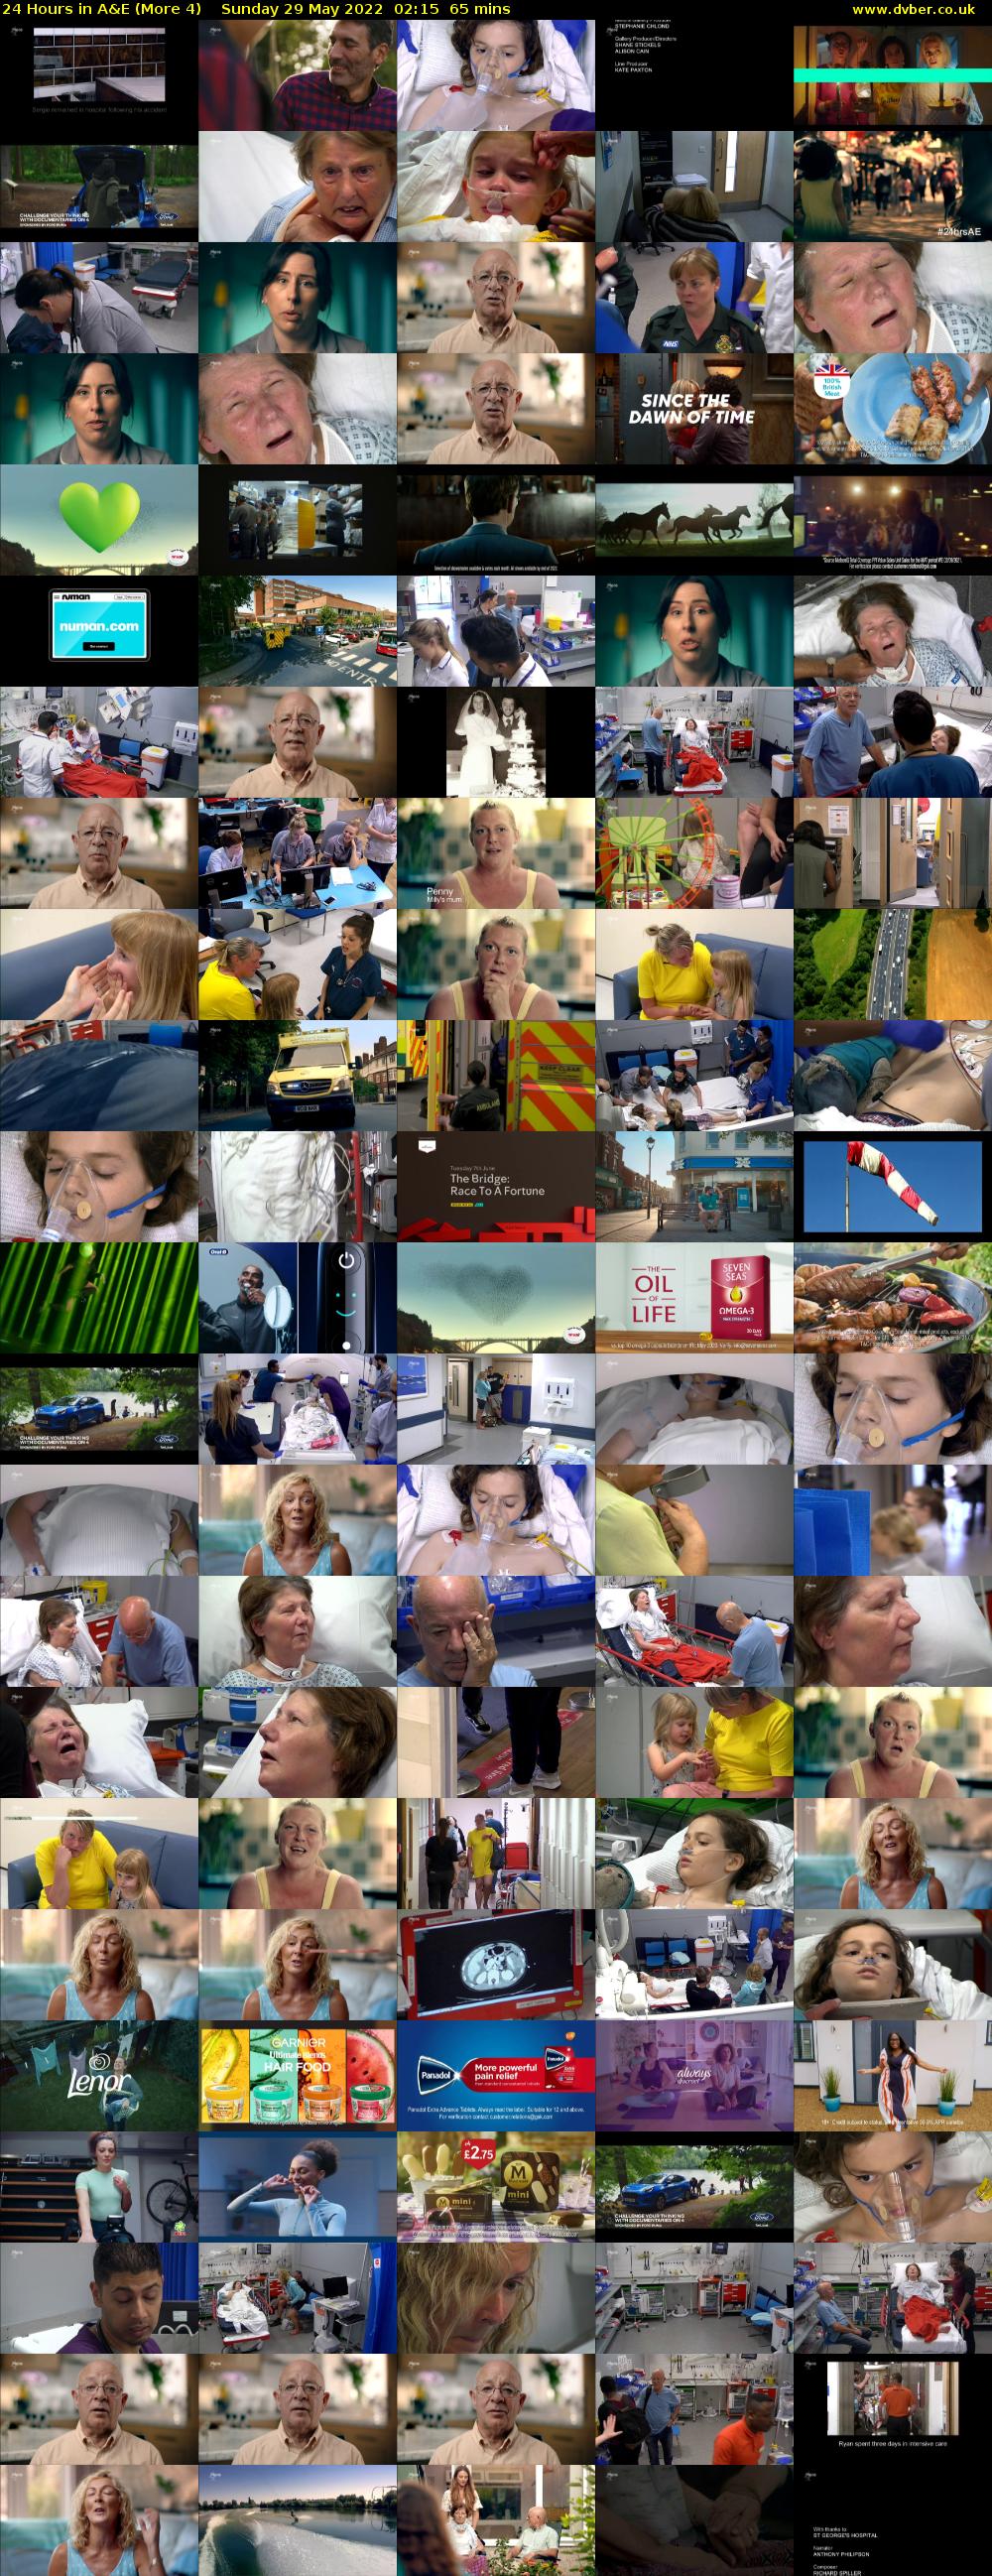 24 Hours in A&E (More 4) Sunday 29 May 2022 02:15 - 03:20